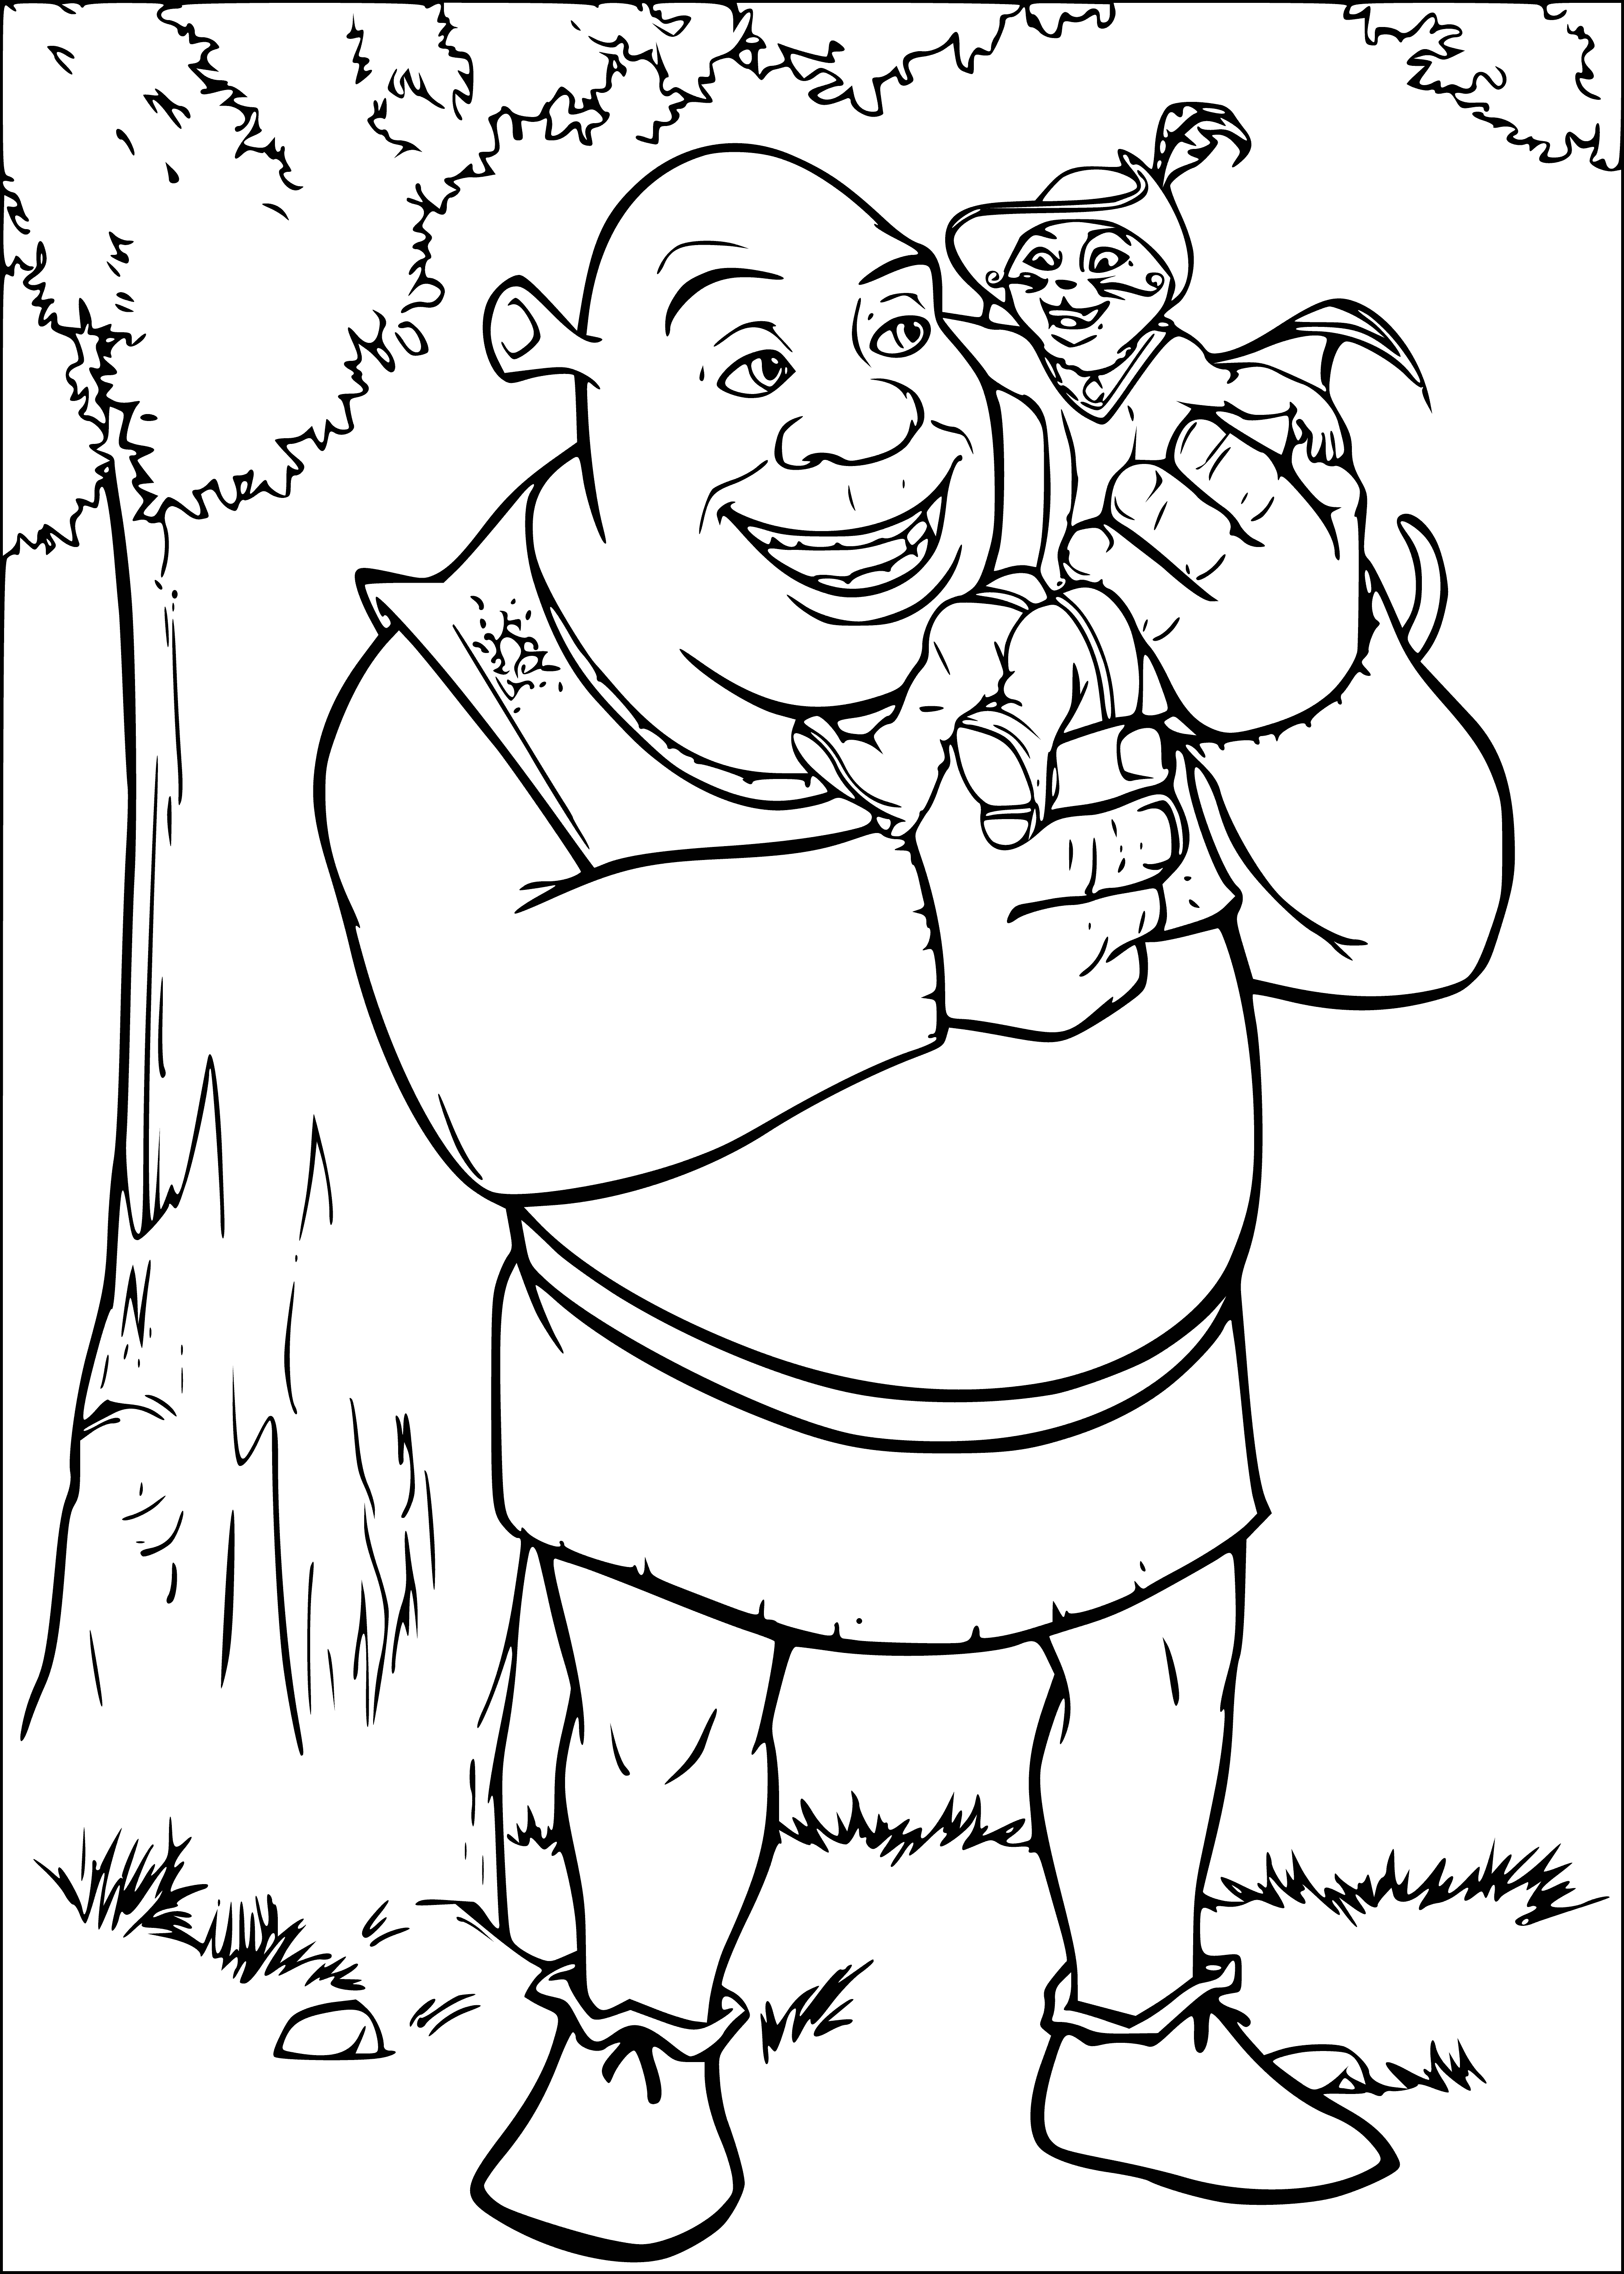 coloring page: Shrek, a green ogre, holds an orange cat with its mouth open, apparently meowing. Shrek looks like he's about to say something.